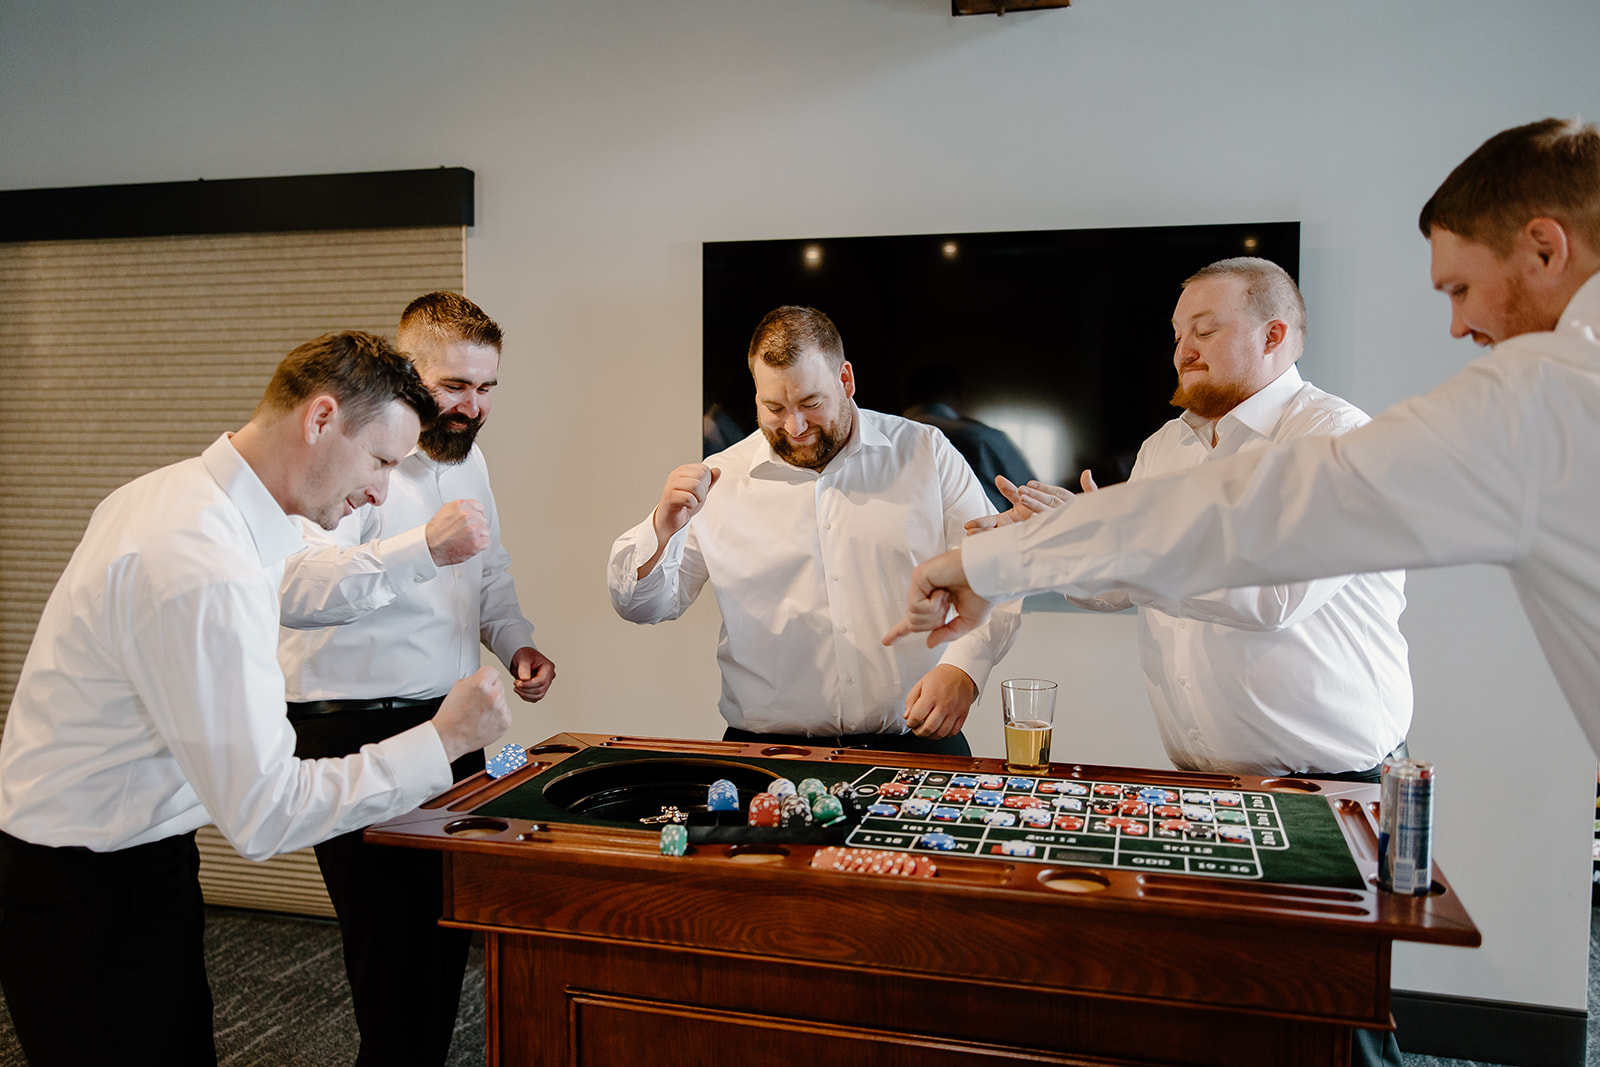 Groom hanging out with groomsmen